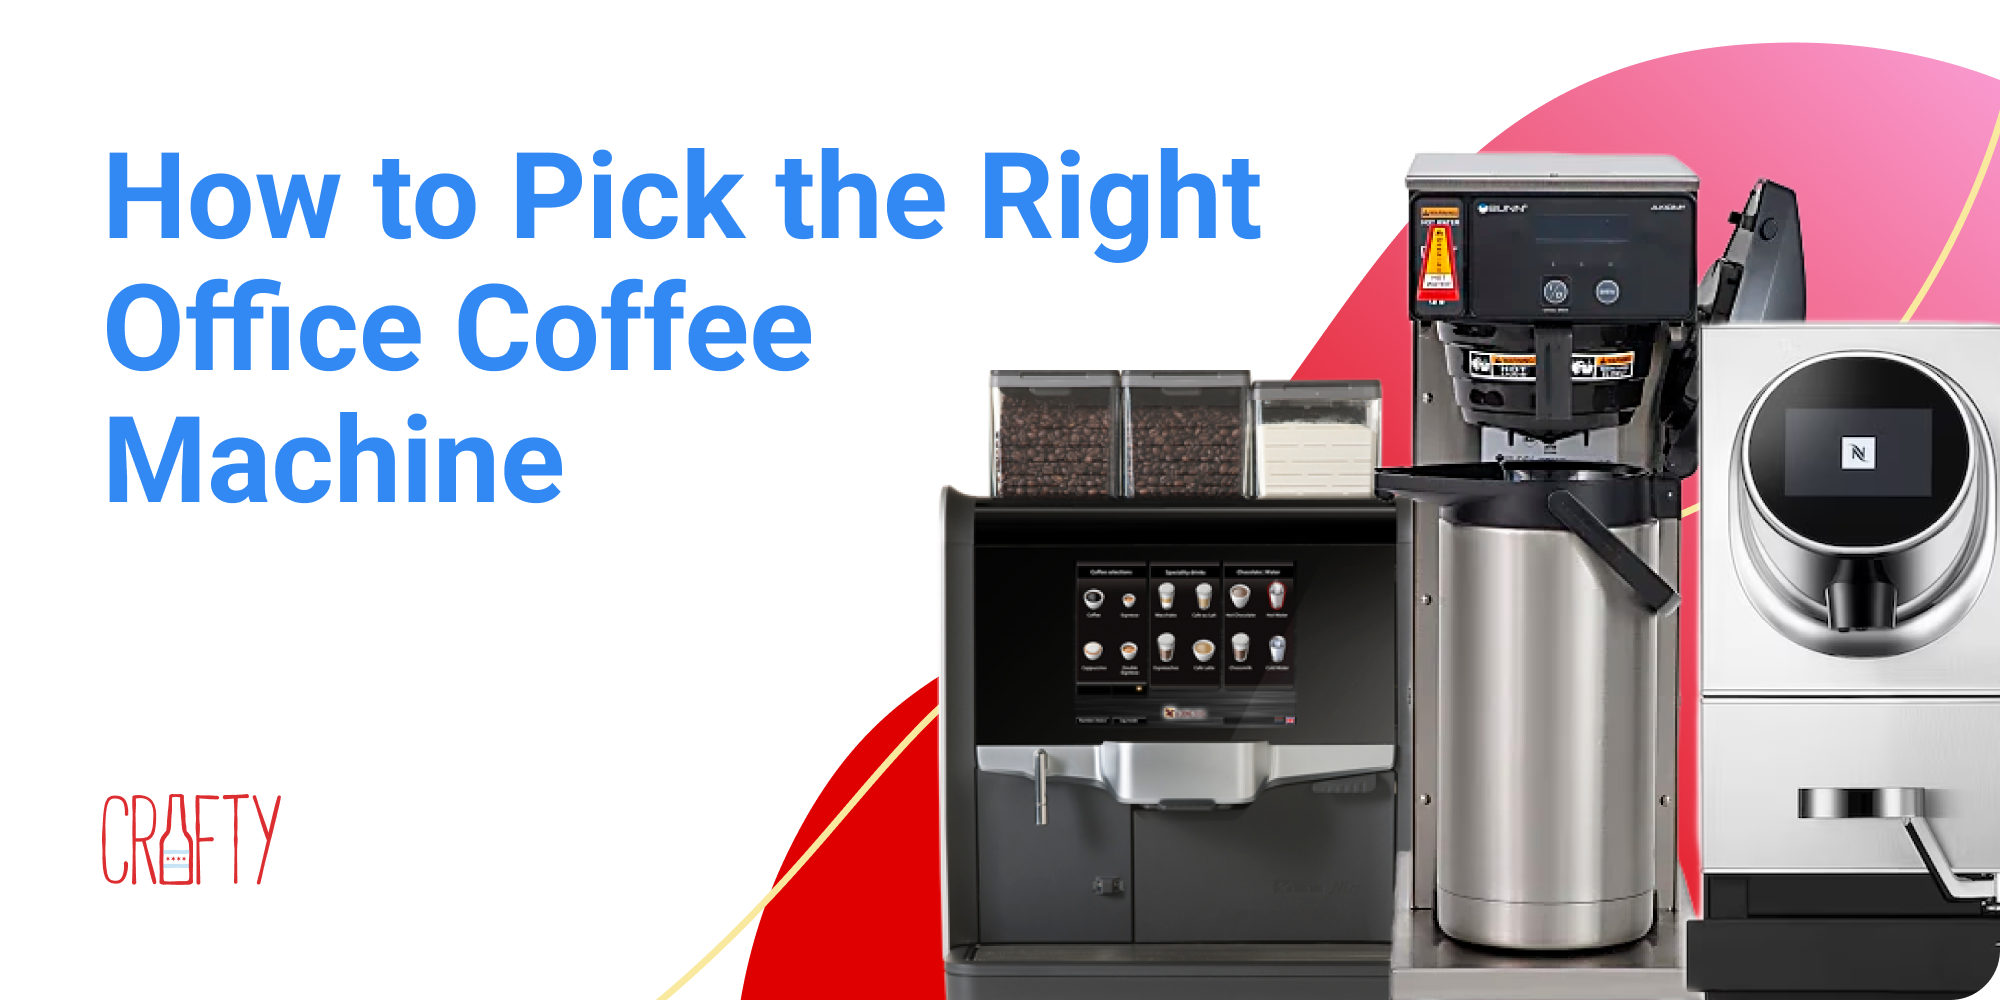 Pick the right office coffee machine